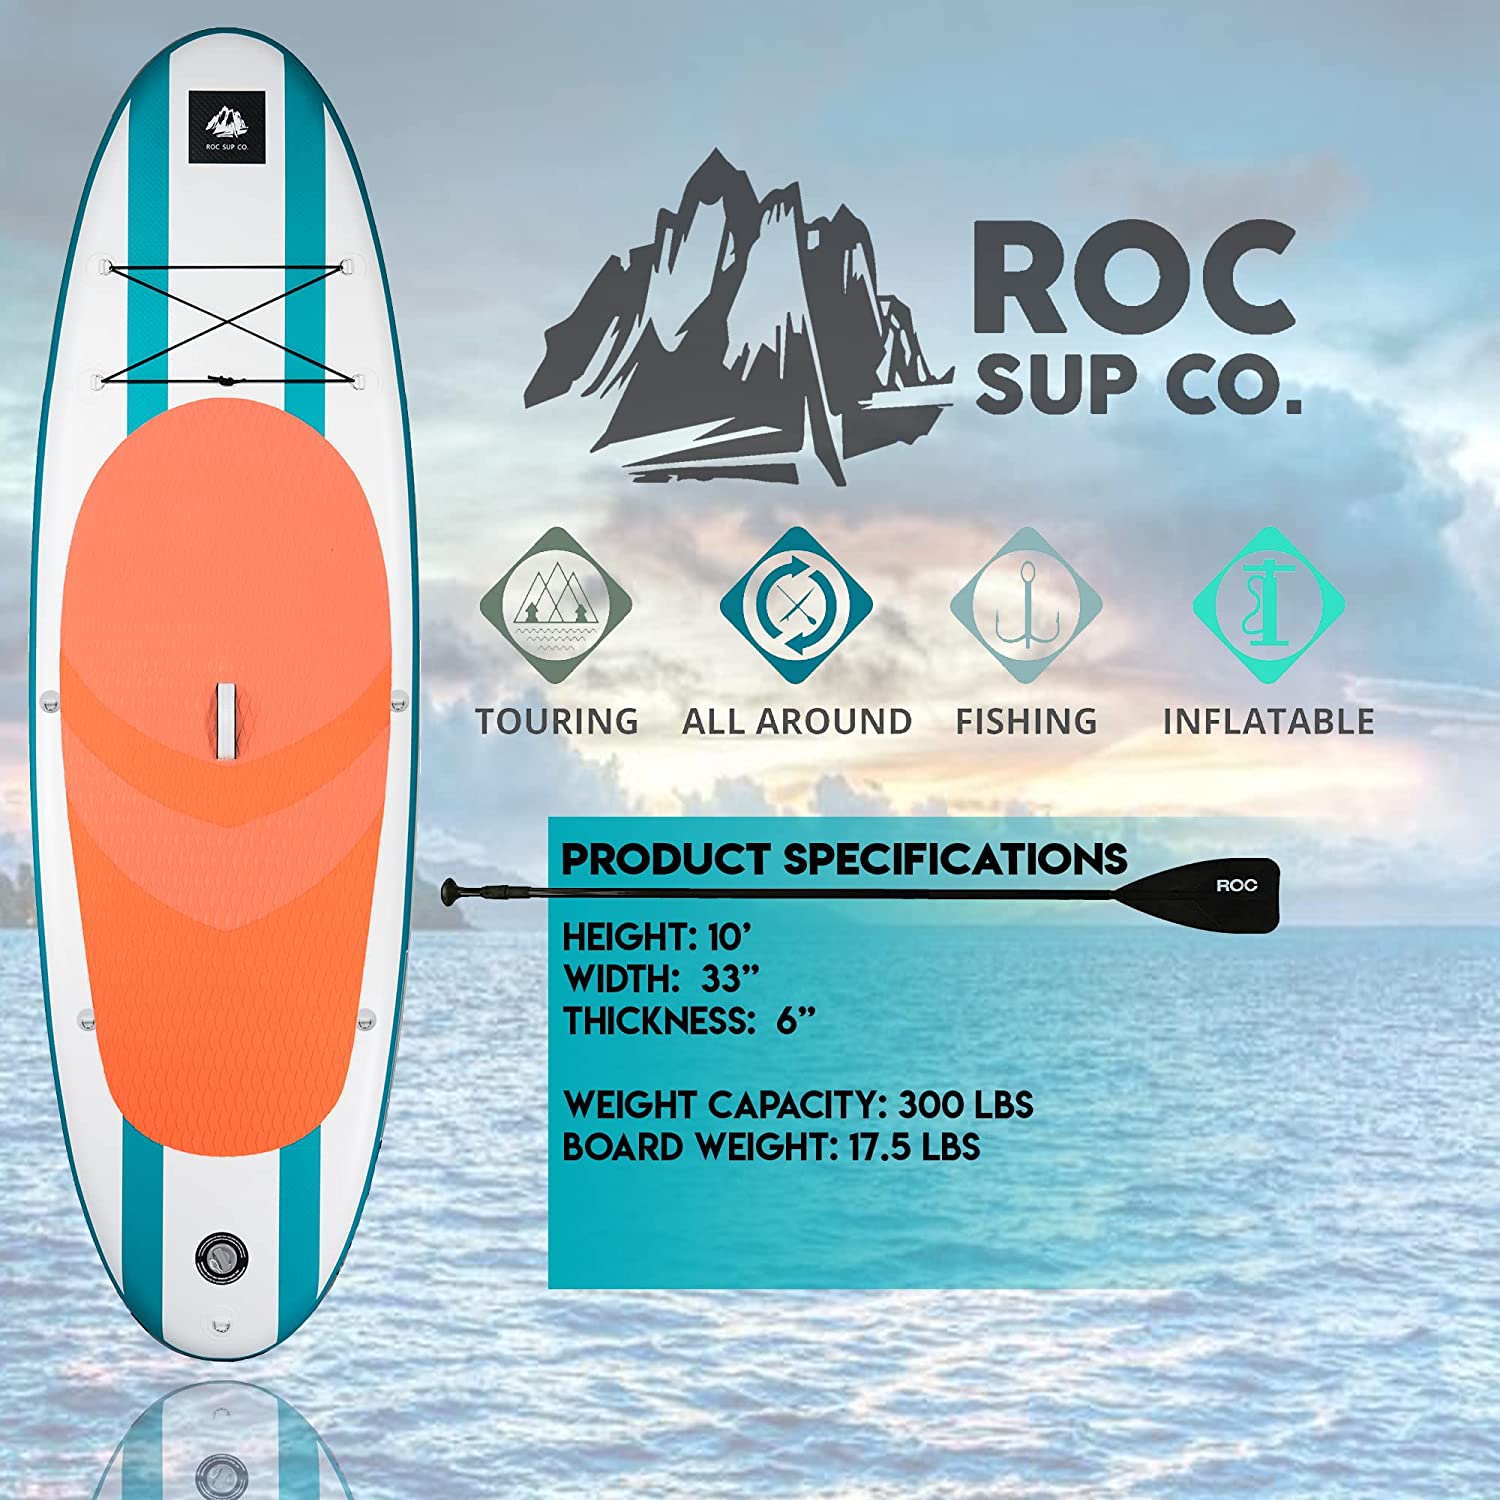 https://bigbigmart.com/wp-content/uploads/2023/05/Roc-Inflatable-Stand-Up-Paddle-Boards-with-Premium-SUP-Paddle-Board-Accessories-Wide-Stable-Design-Non-Slip-Comfort-Deck-for-Youth-Adults%E2%80%A62.jpg